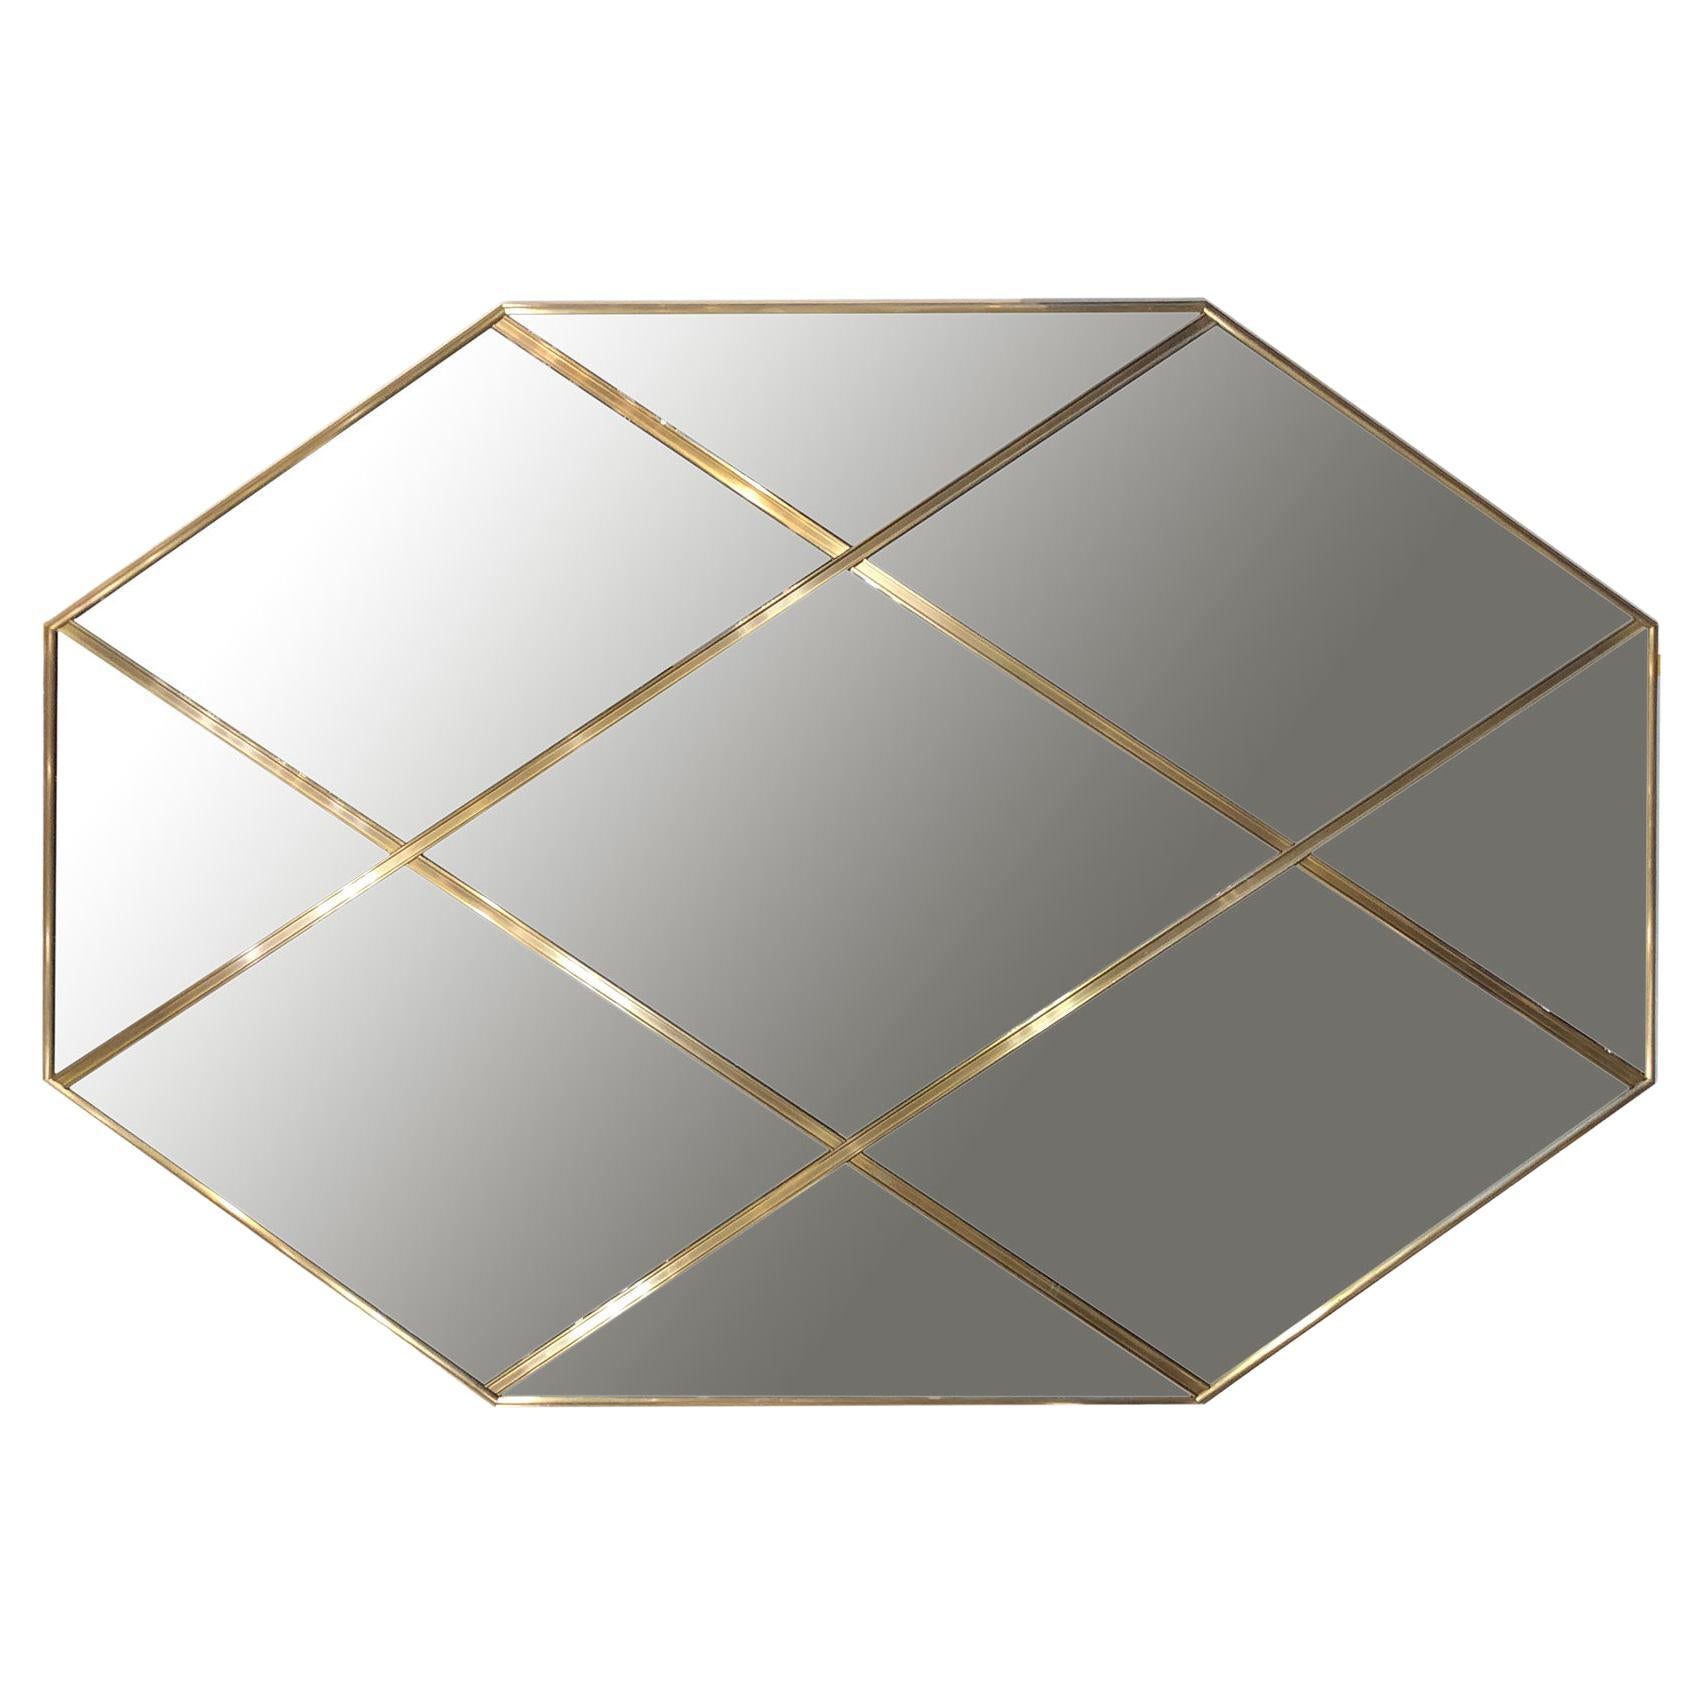 Contemporary Octagonal Art Deco Style Brass Paneled Smoked Mirror 150 X 100 CM For Sale